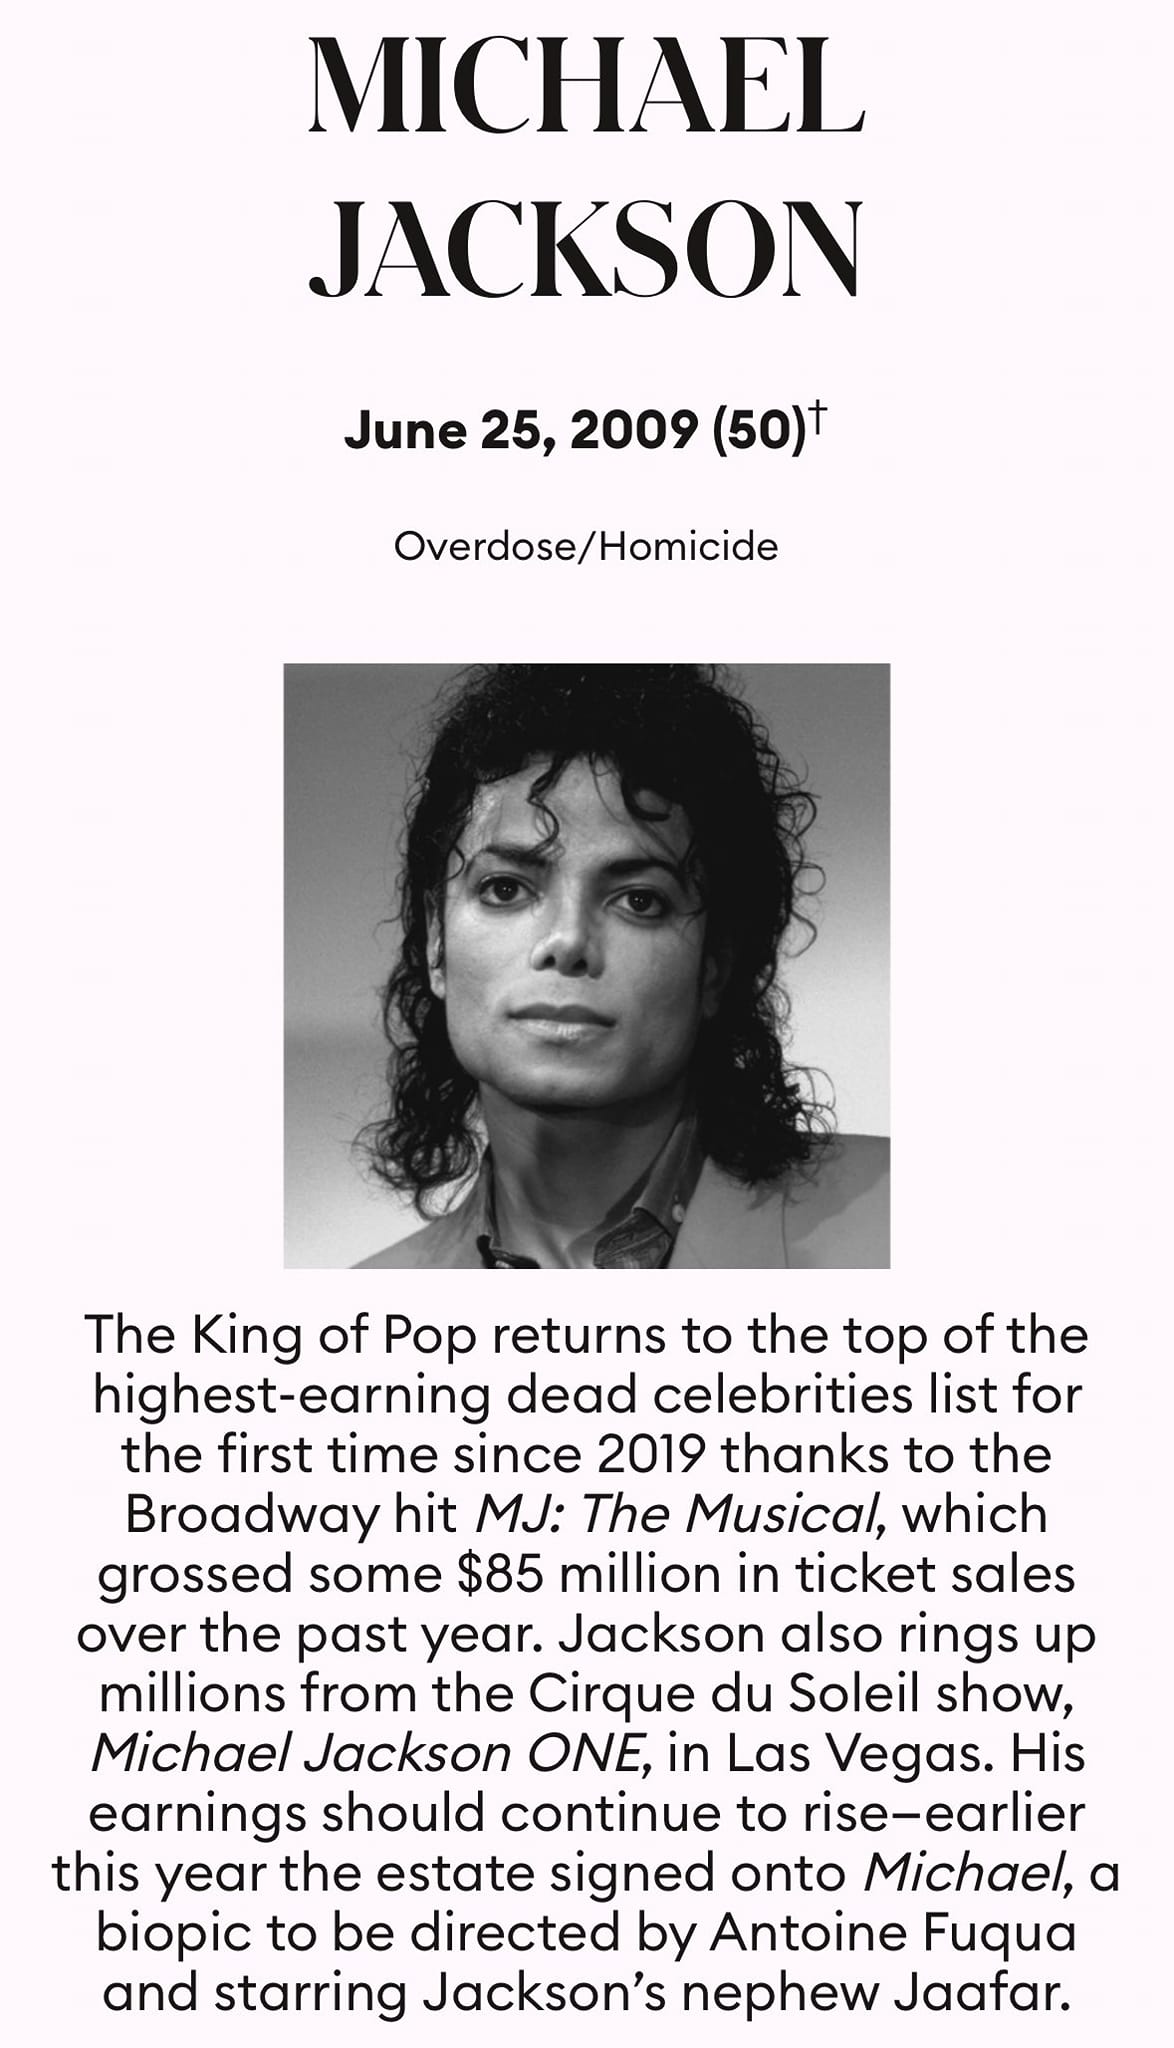 Ist möglicherweise ein Bild von 1 Person und Text „MICHAEL JACKSON June 25, 2009 (50)+ Overdose/Homicide The King of Pop returns to the top of the highest-earning dead celebrities list for the first time since 2019 thanks to the Broadway hit MJ: The Musical, which grossed some $85 million in ticket sales over the past year. Jackson also rings up millions from the Cirque du Soleil show, Michael Jackson ONE, in Las Vegas. His earnings should continue to rise-earlier this year the estate signed onto Michael, biopic to be directed by Antoine Fuqua and starring Jackson's nephew Jaafar.“